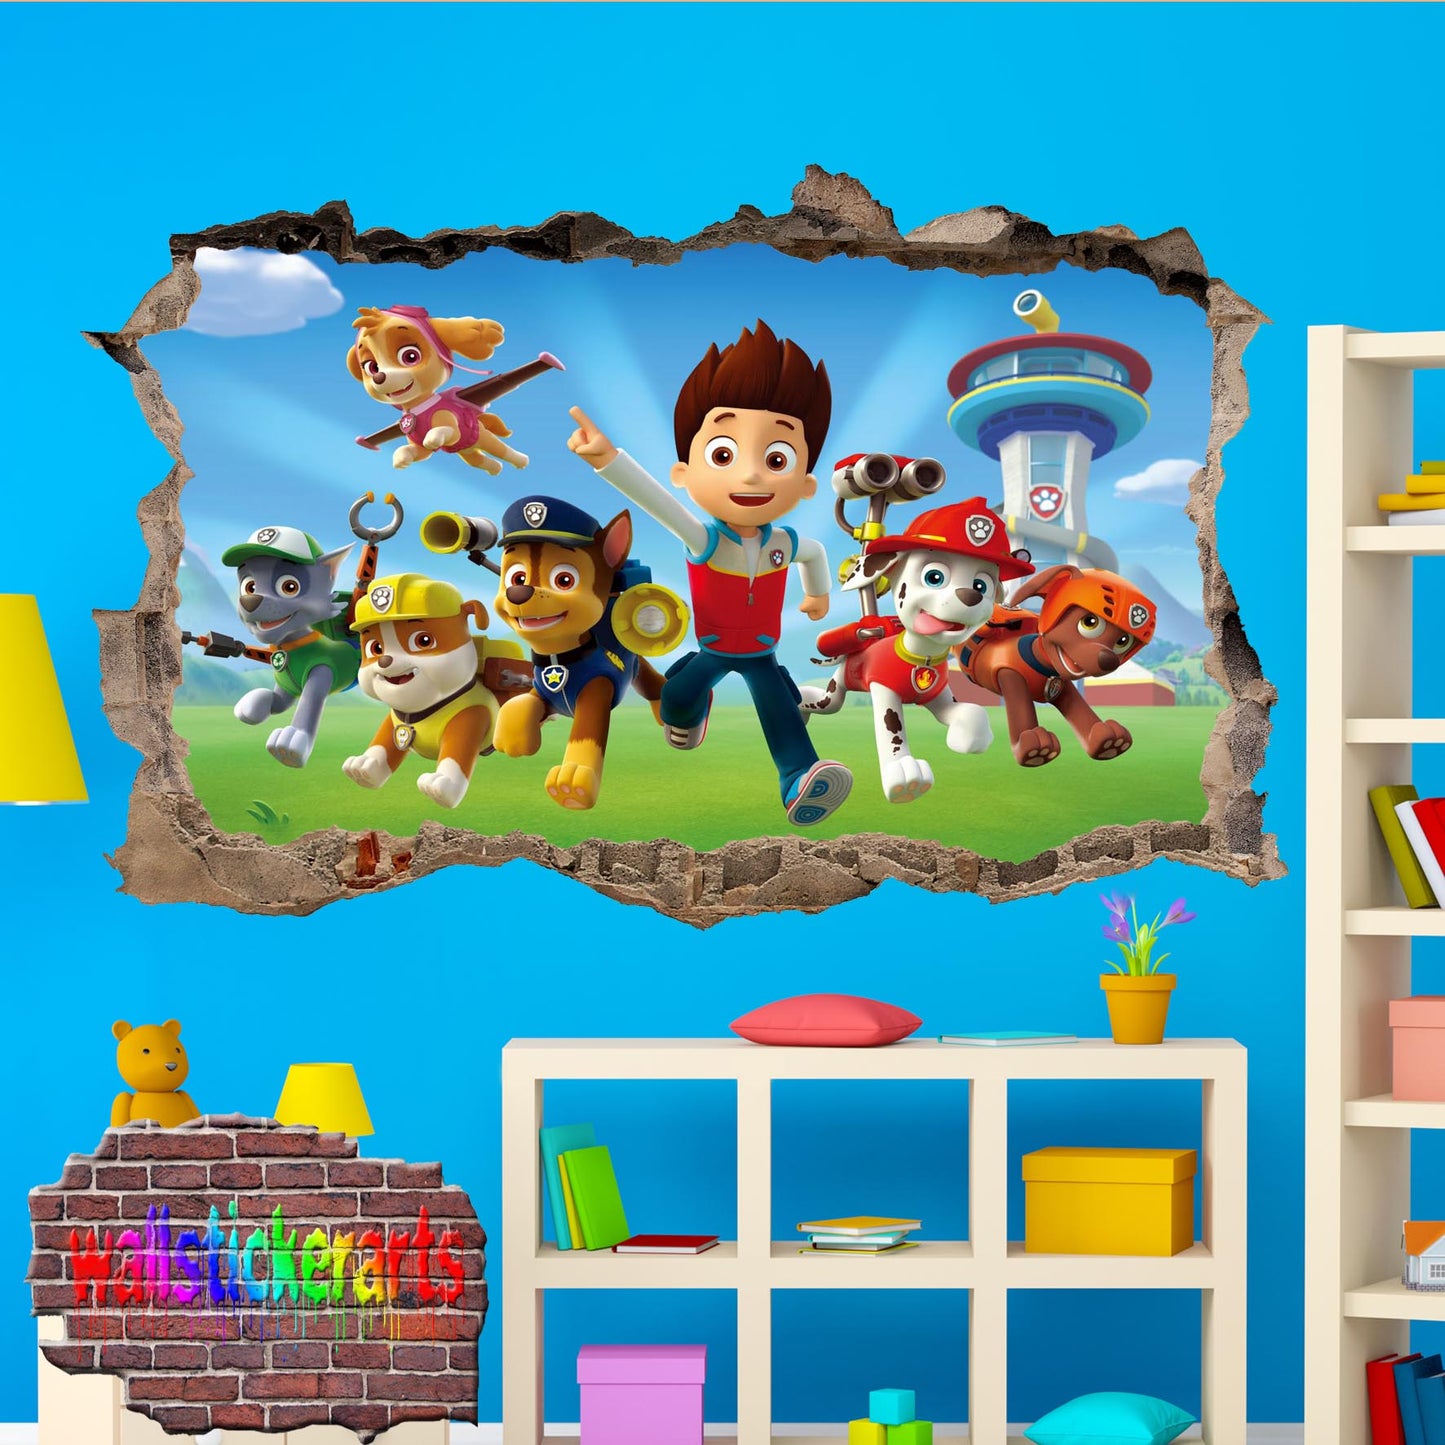 PAW PATROL CHARACTERS 3D ART WALL STICKER MURAL POSTER DECAL